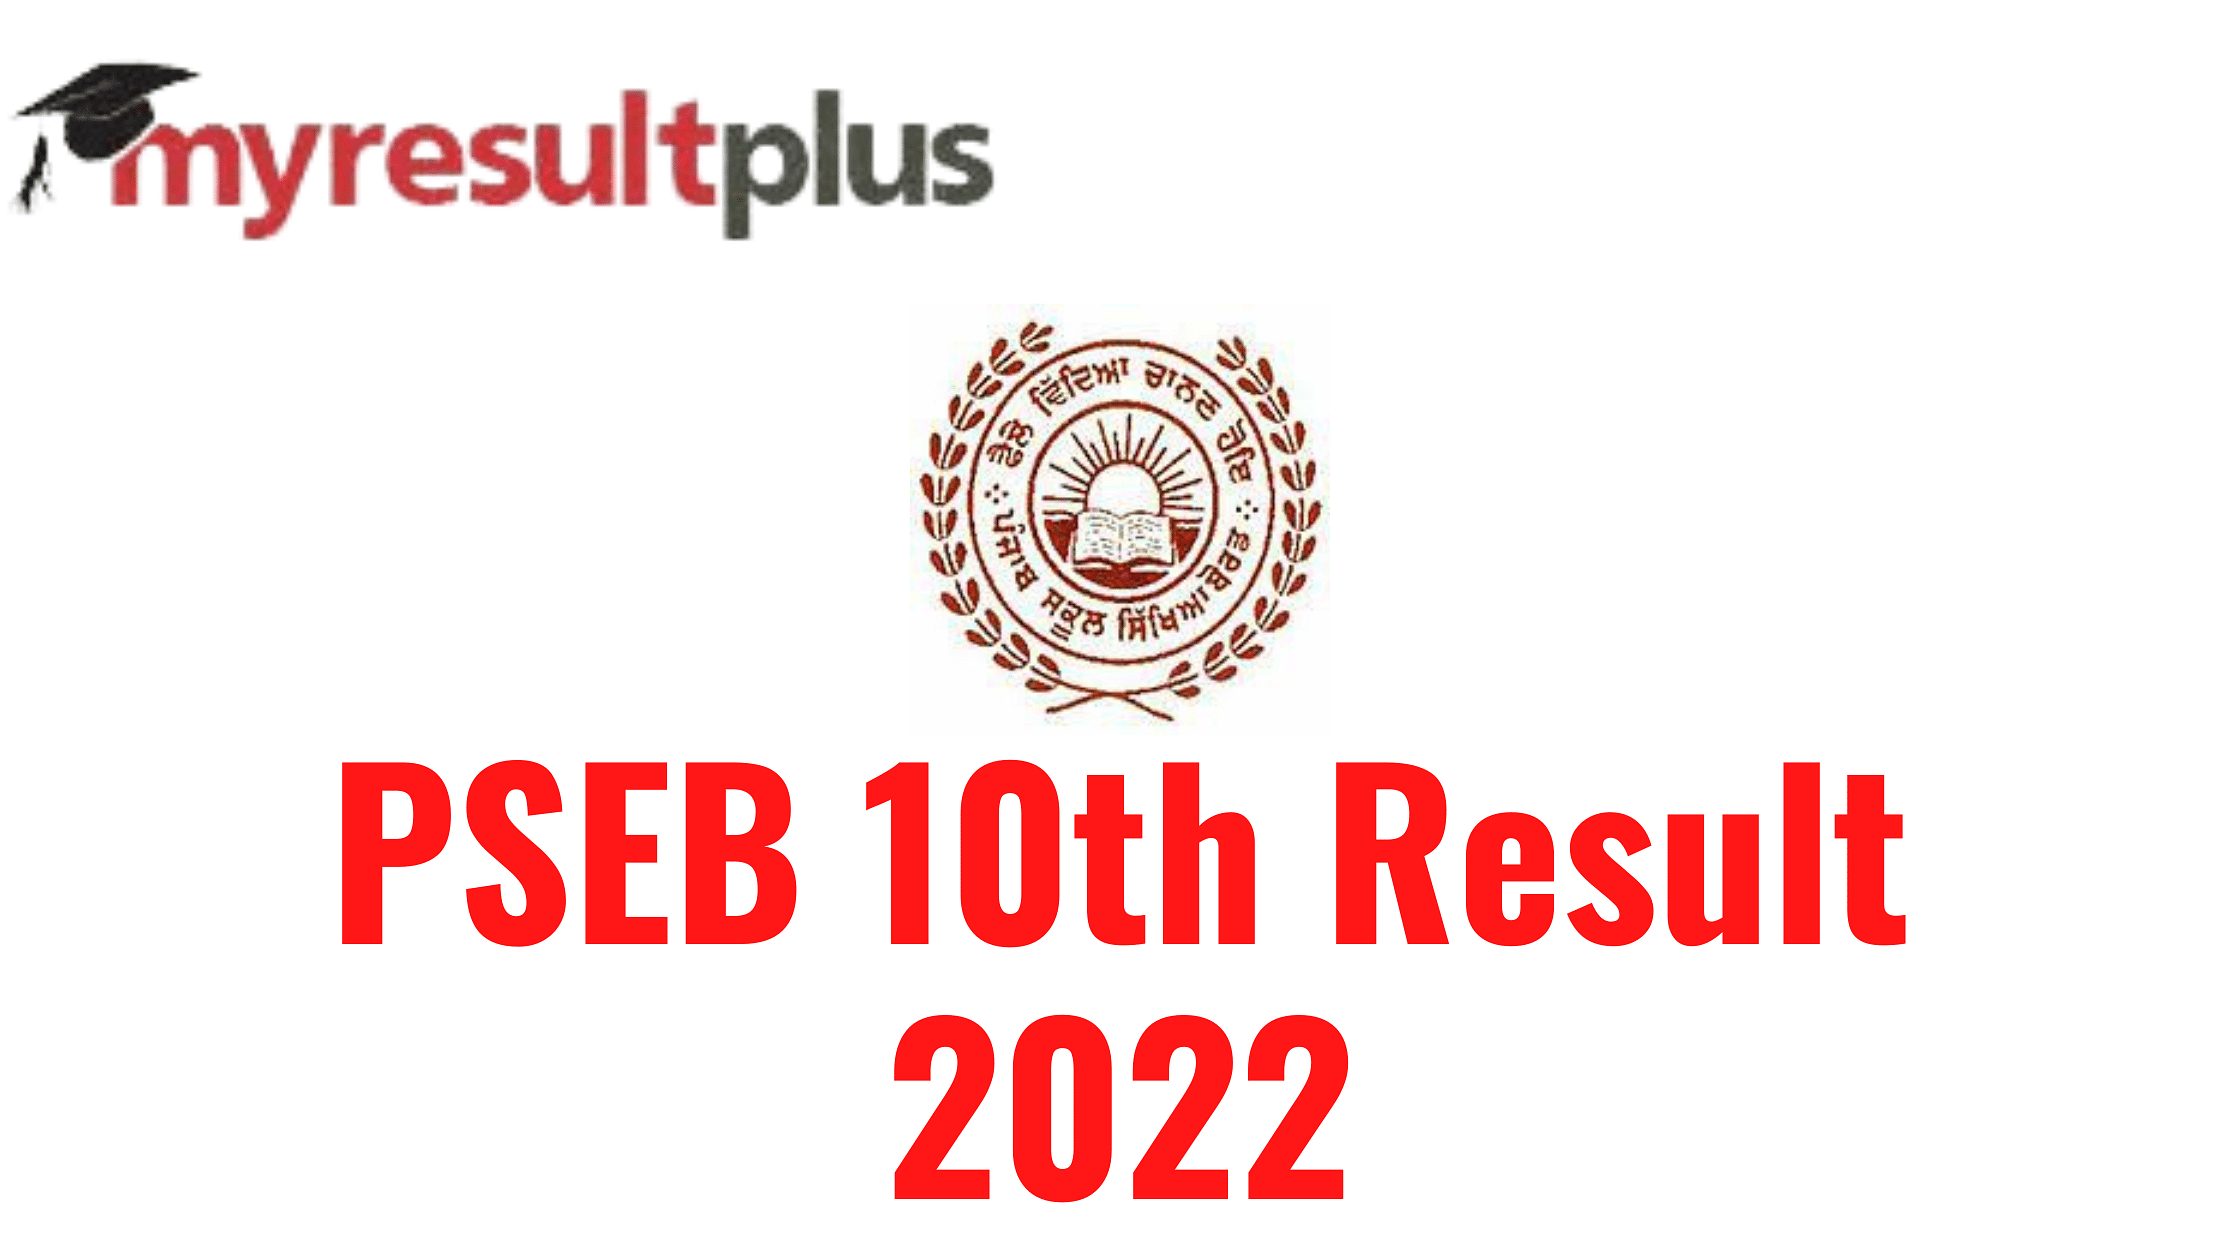 PSEB 10th Result 2022 Declared, Check Toppers List Here